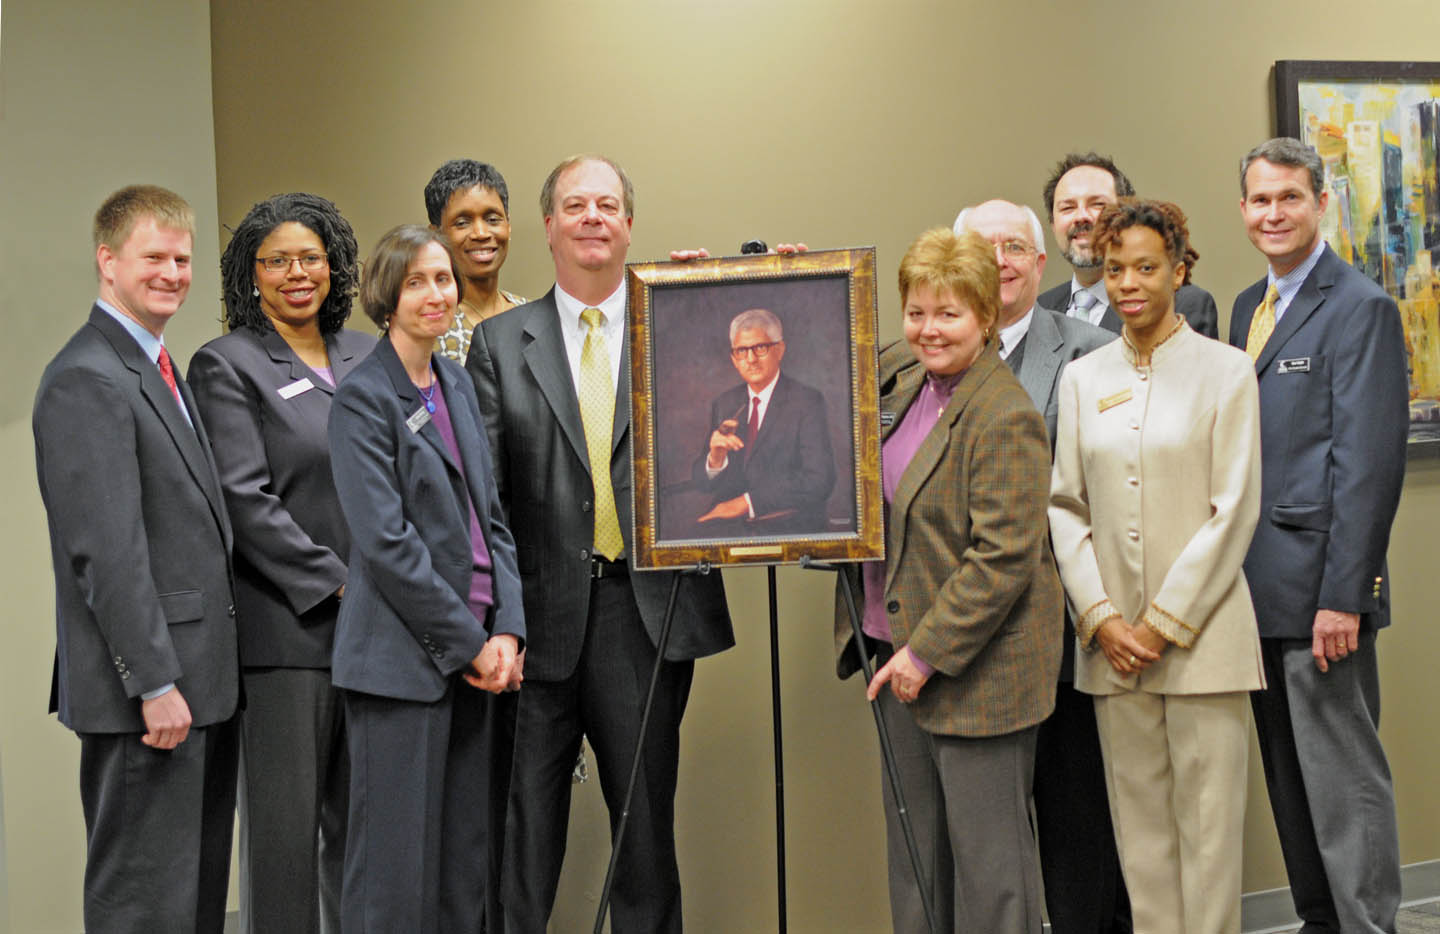 CCCC joins in celebration of Dallas Herring, father of N.C. community colleges